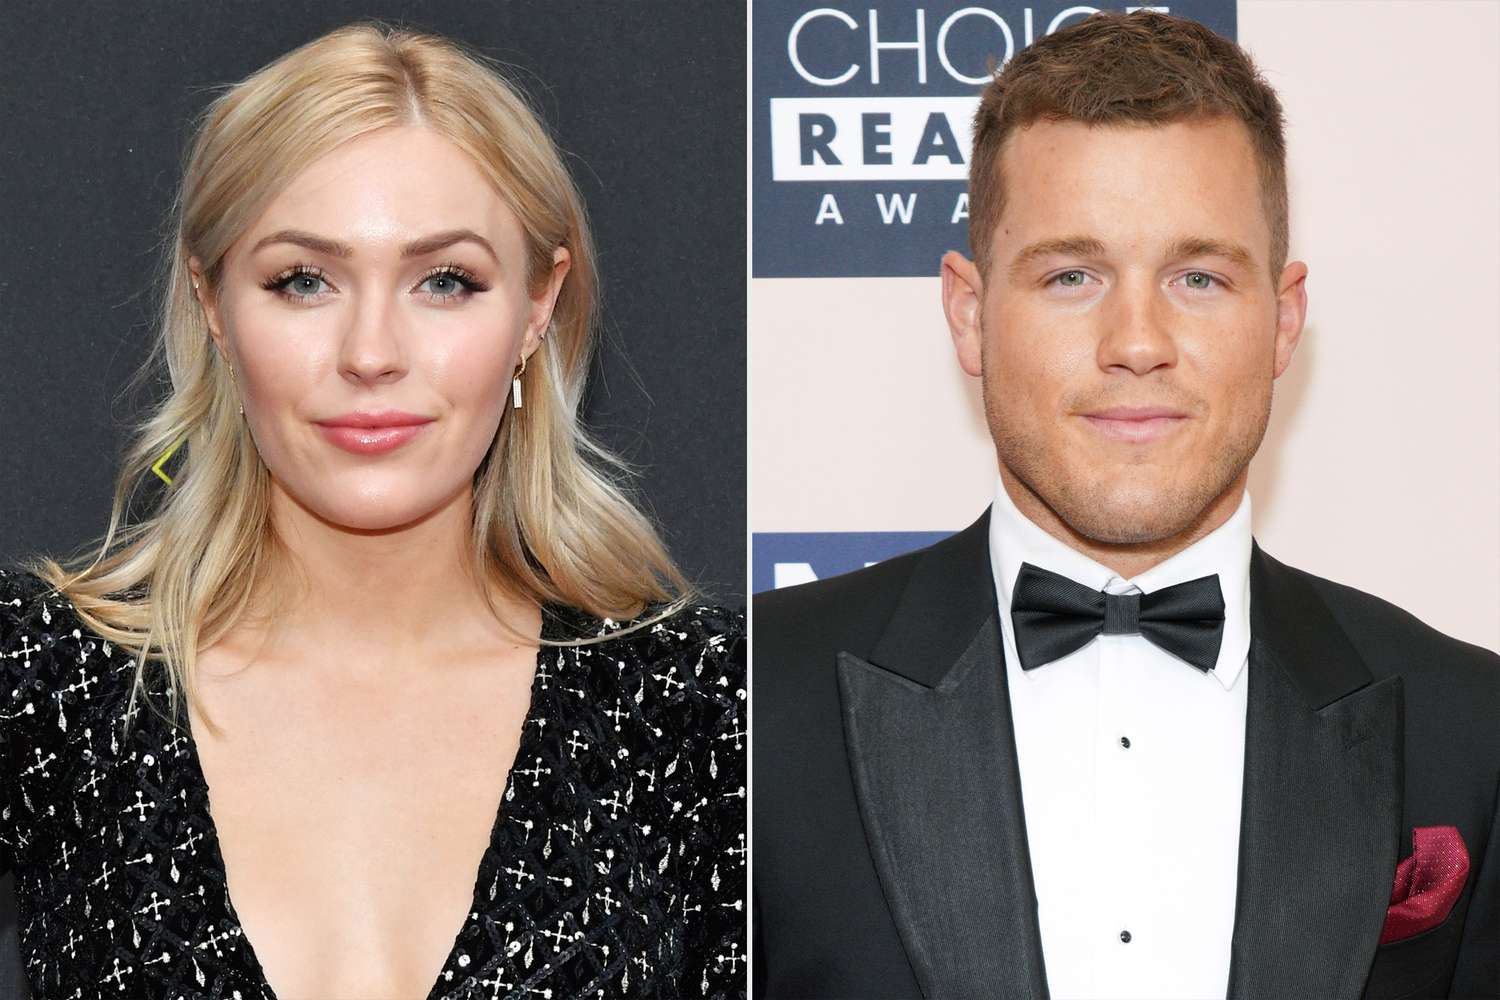 Cassie Randolph Wants Colton Underwood 'to Get Whatever Help He Needs': Source - msnNOW